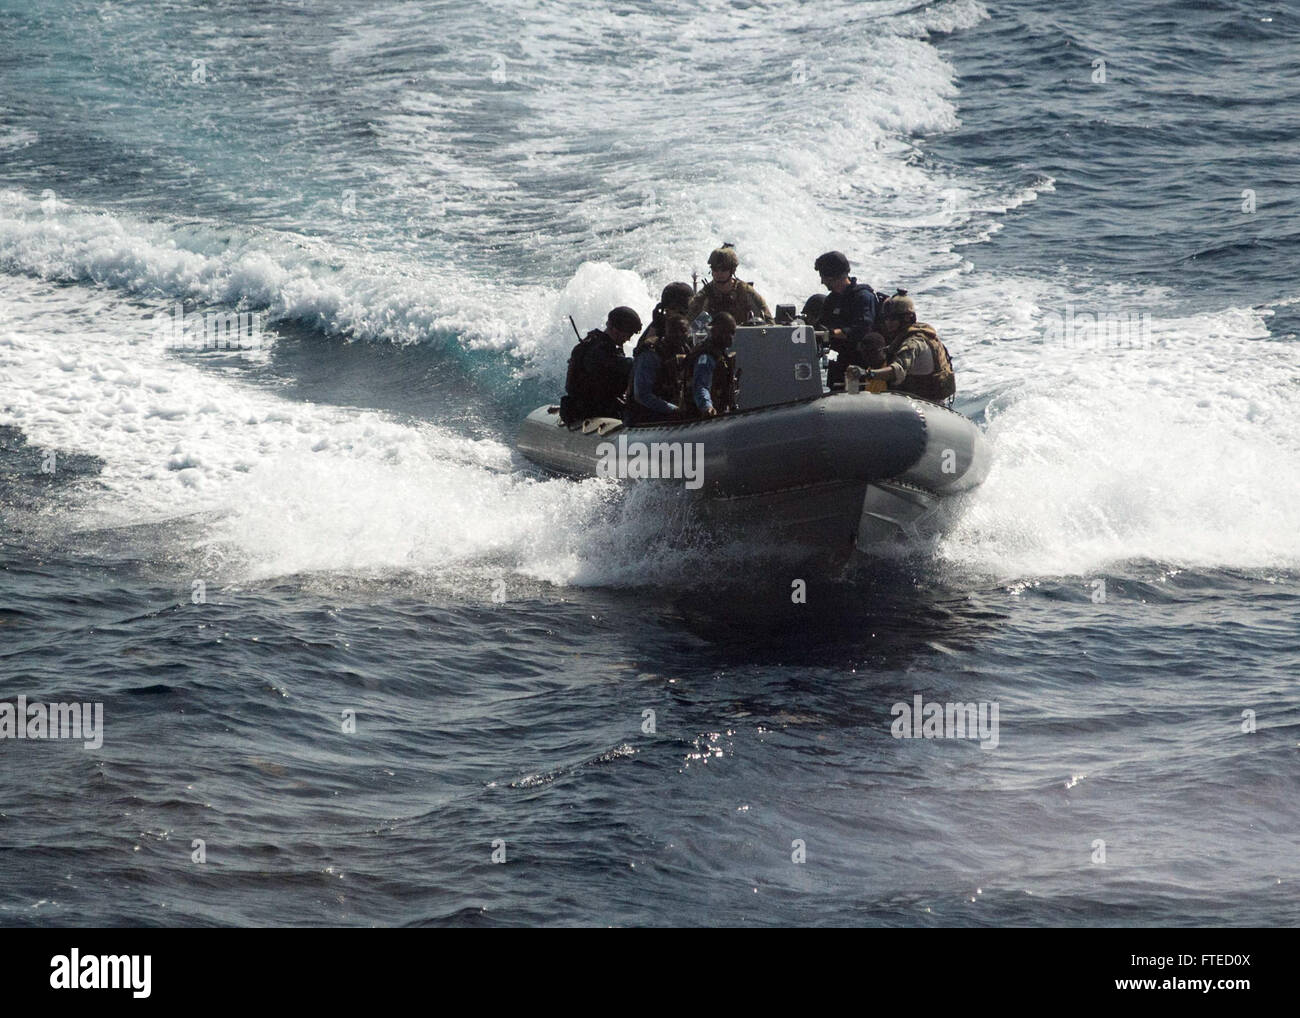 GULF OF GUINEA (April 1, 2014) - U.S. Sailors, U.S. Coast Guardsmen and members of various Ghanaian maritime forces, all embarked aboard joint, high-speed vessel USNS Spearhead (JHSV 1) operate in a rigid-hull inflatable boat (RHIB) during a document verification operation as part of a U.S.-Ghana combined maritime law enforcement operation under the African Maritime Law Enforcement Partnership (AMLEP) program. AMLEP, the operational phase of Africa Partnership Station (APS), brings together U.S. Navy, U.S. Coastguard, and respective Africa partner maritime forces to actively Stock Photo